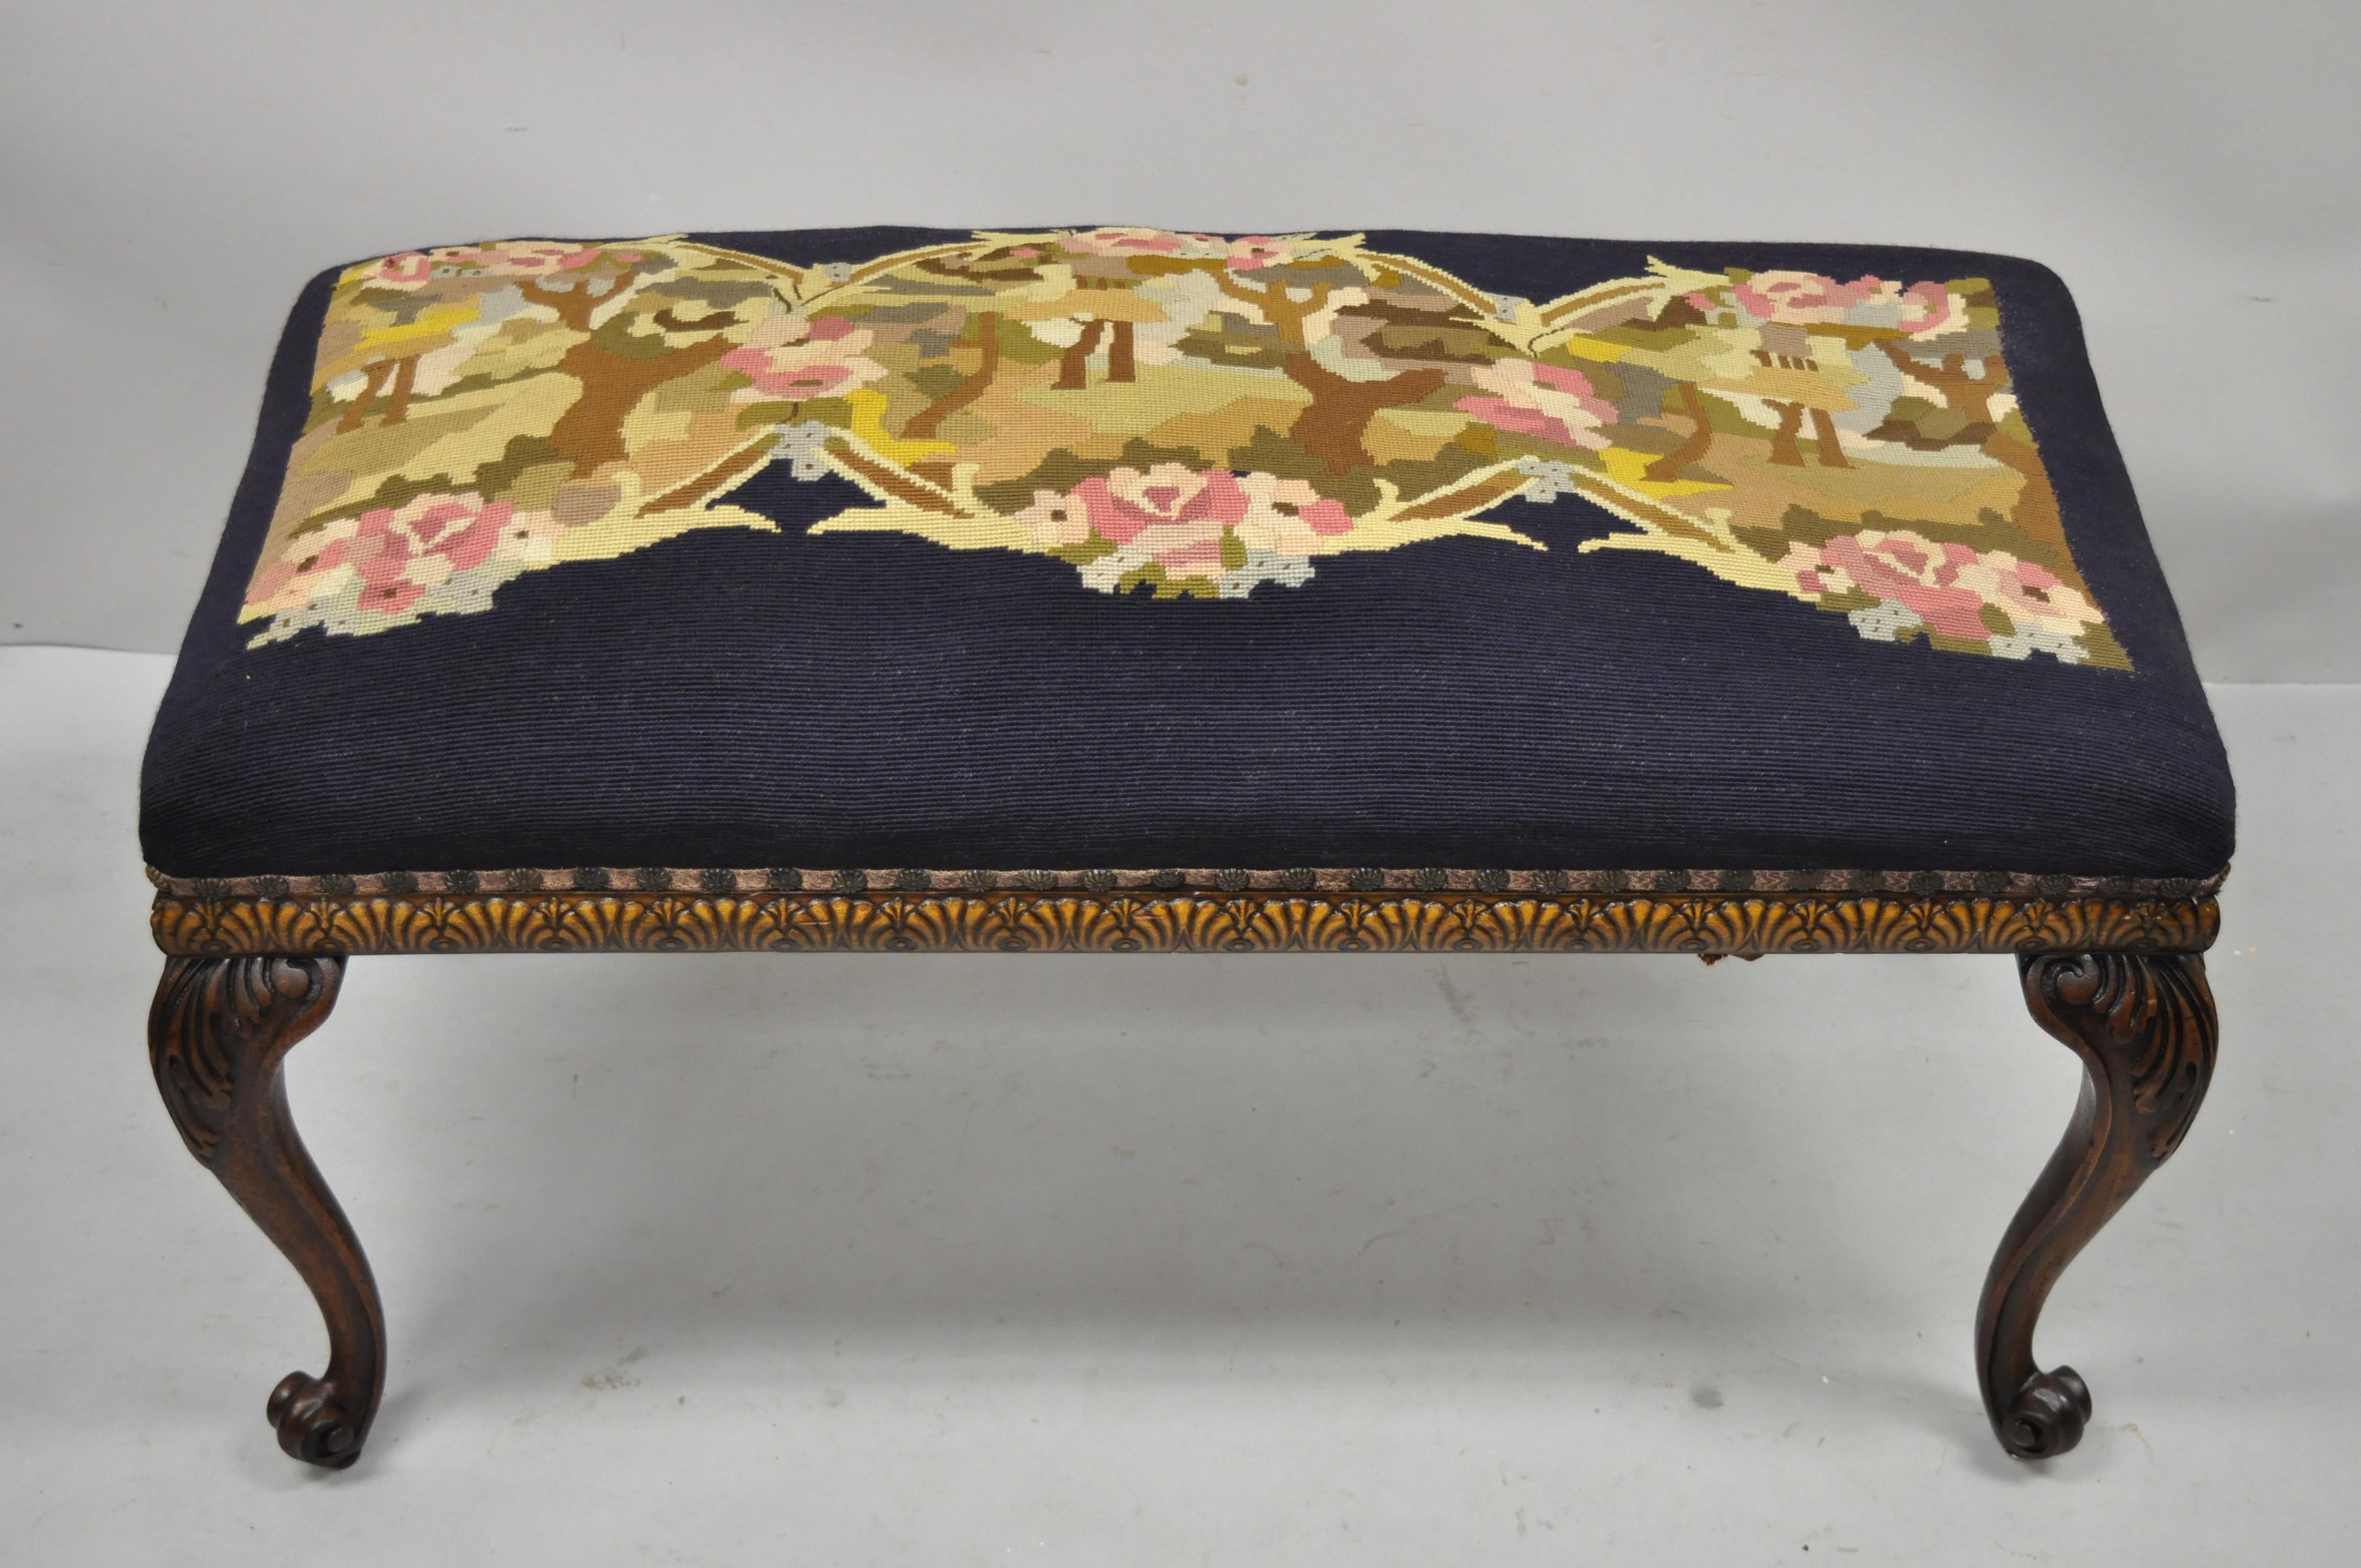 Antique French Victorian needlepoint carved cabriole leg mahogany bench. Item features a needlepoint seat, solid wood carved base, 